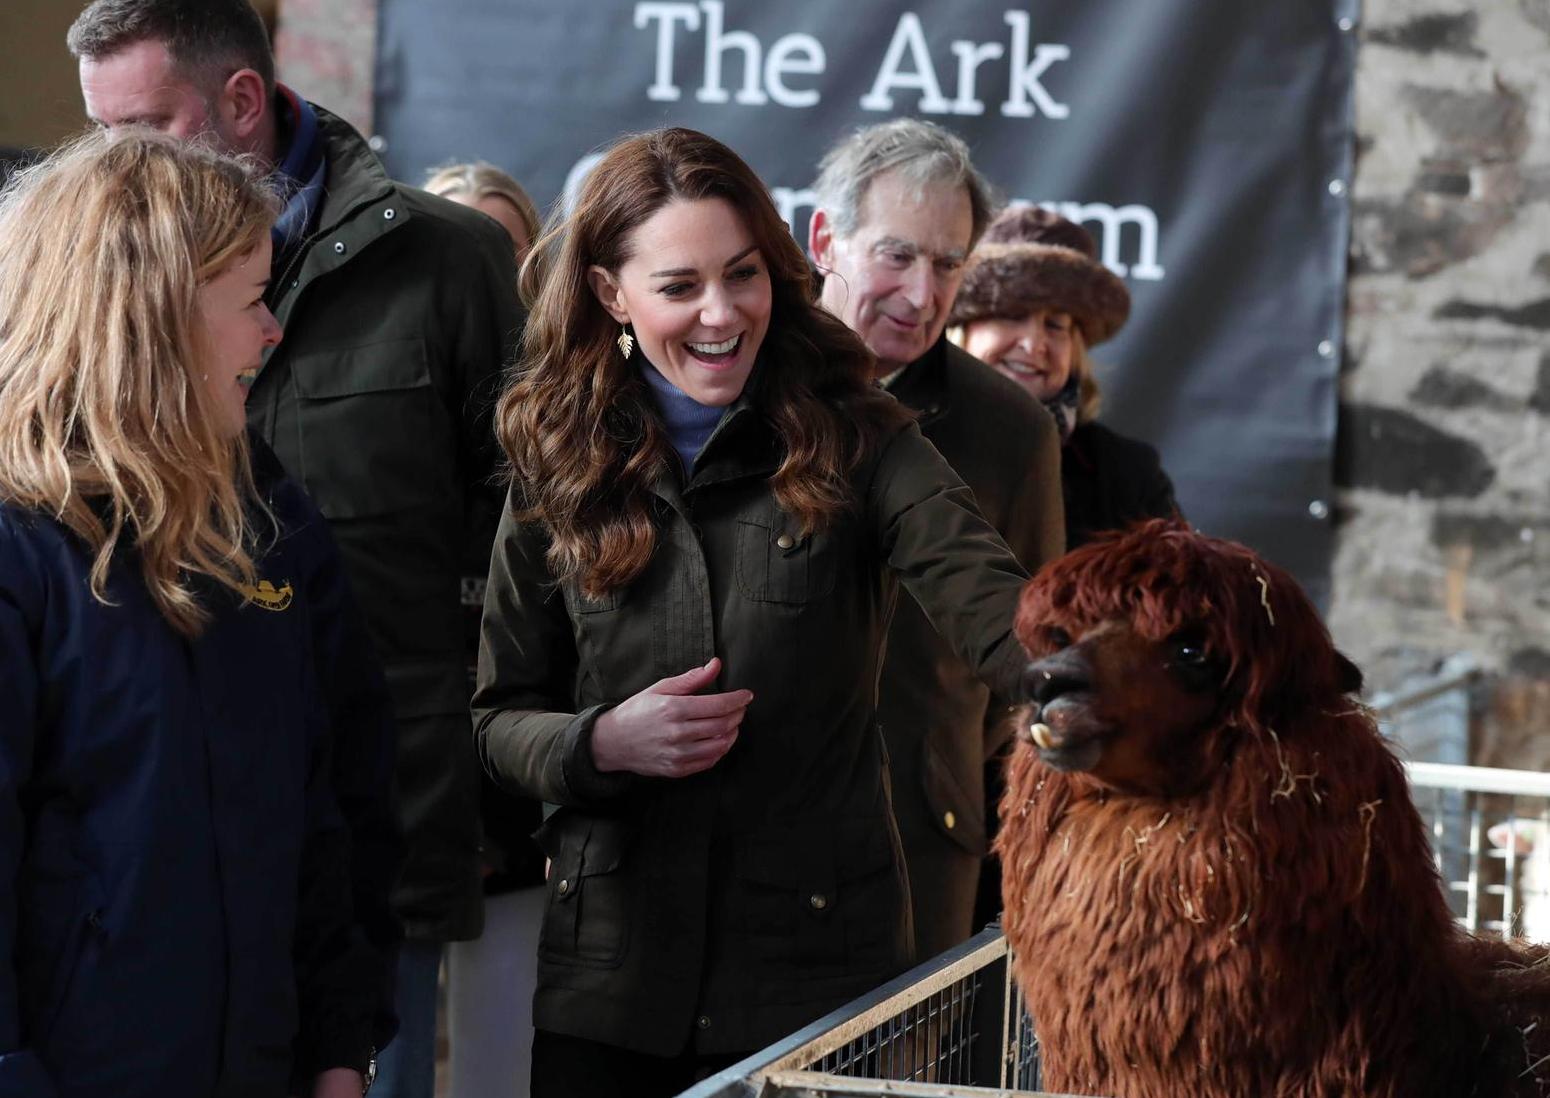 The Duchess of Cambridge strokes an alpaca during a visit to The Ark Open Farm, at Newtownards, near Belfast, where she is meeting with parents and grandparents to discuss their experiences of raising young children for her Early Childhood survey